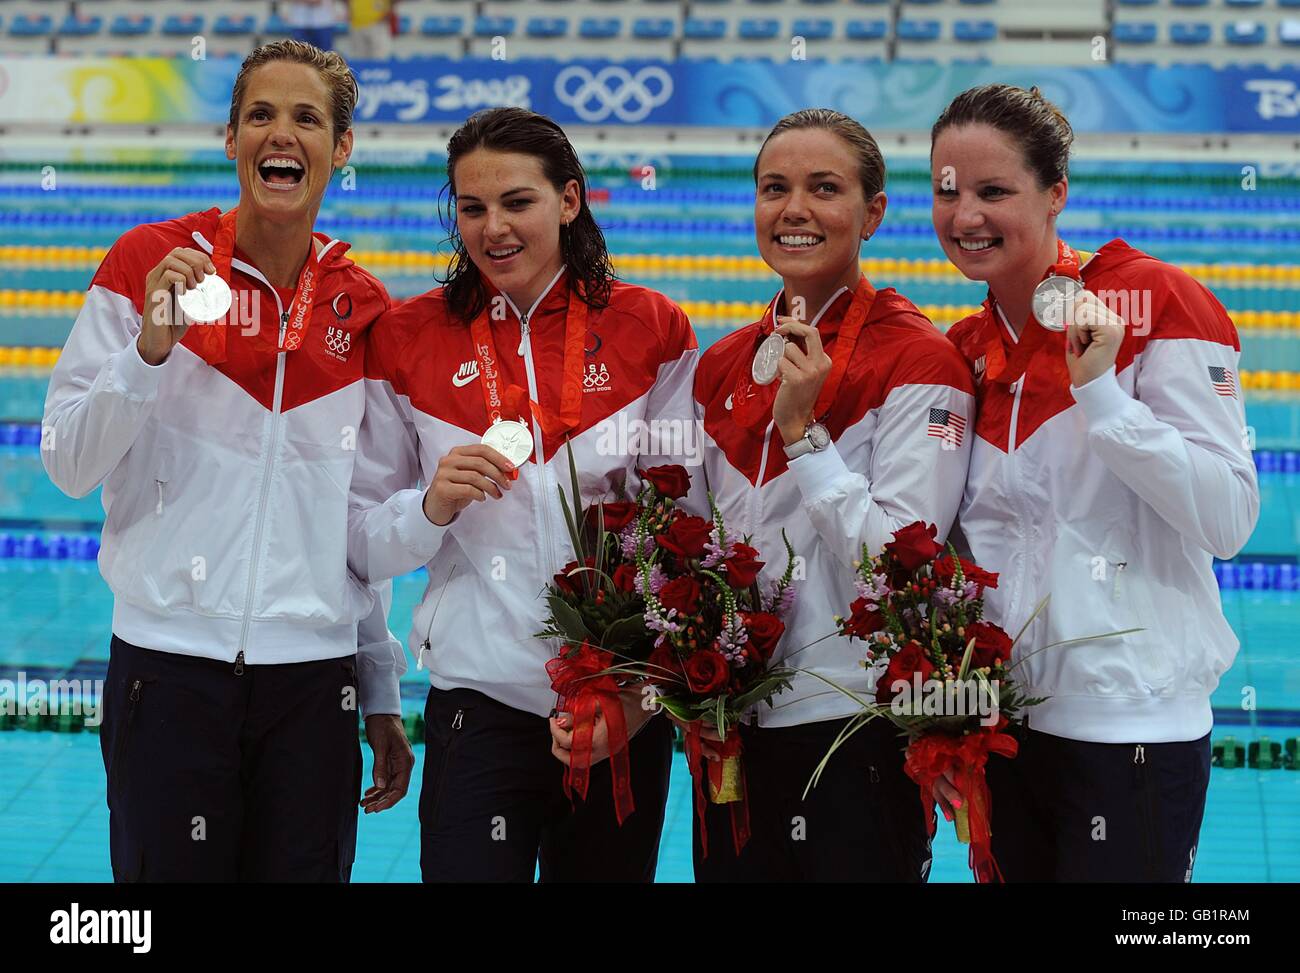 American women's 4x100m relay team with their silver medals. (L-R) Dara Torres, Lacey NyMeyer, Natalie Coughlin and Kara Lynn Joyce. Stock Photo